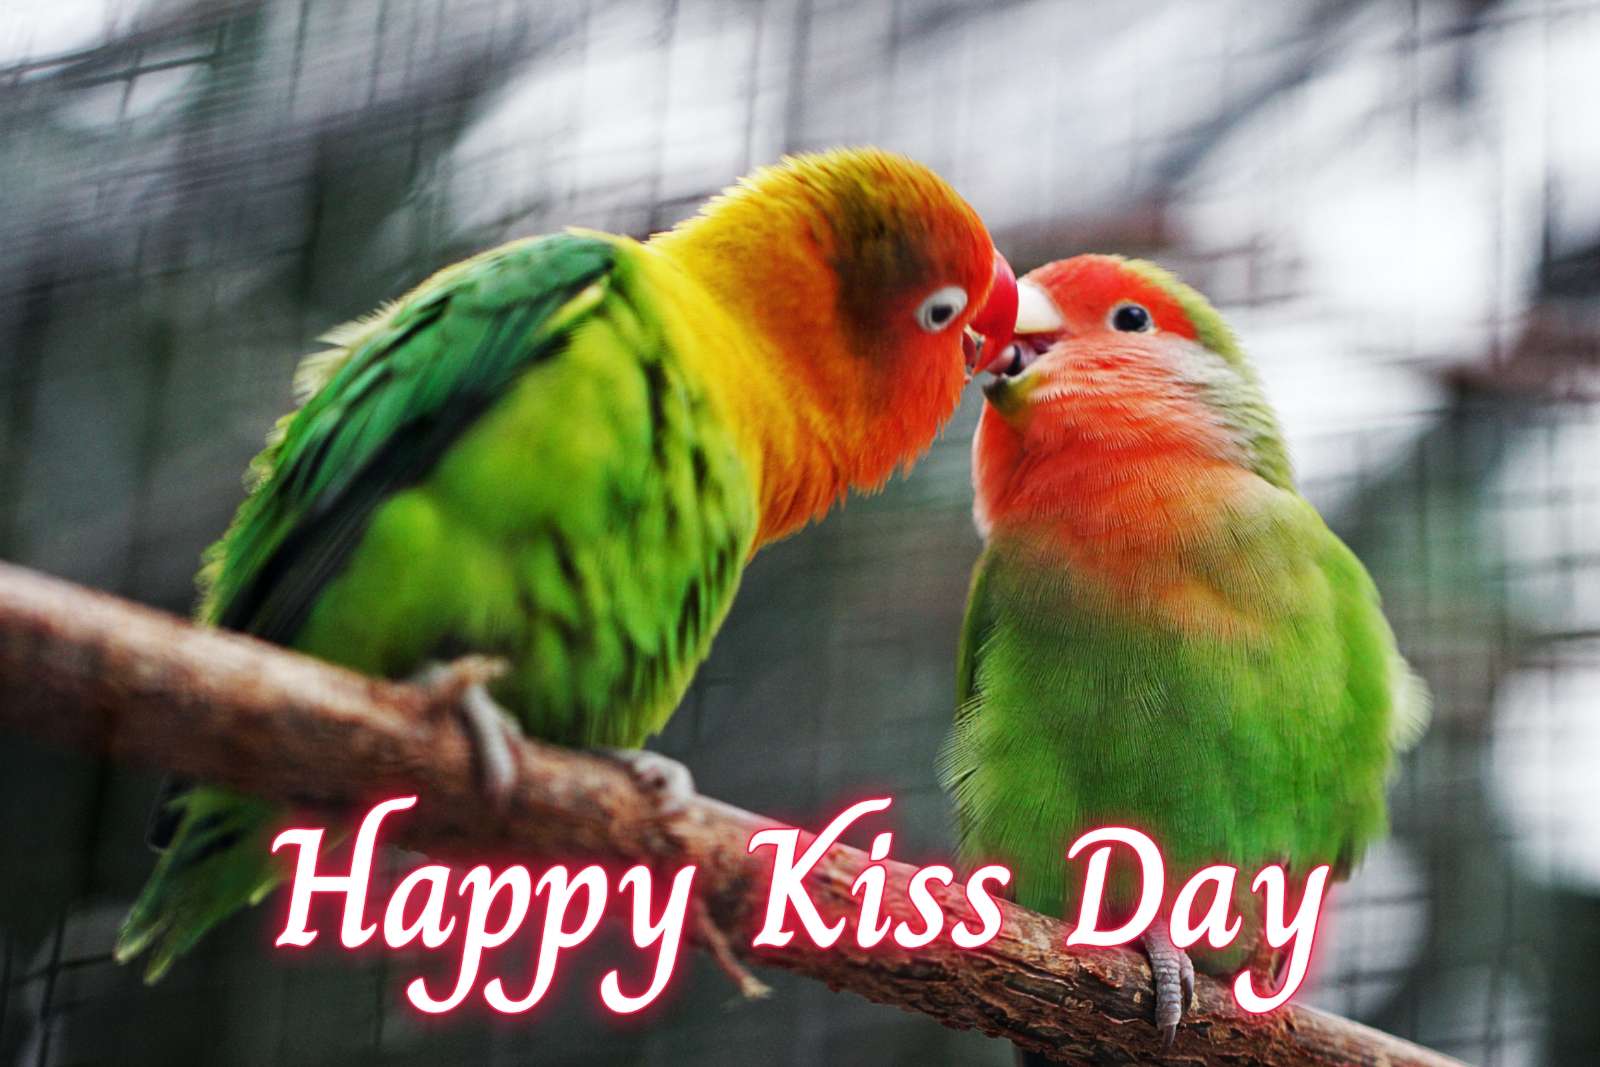 Happy Kiss Day Parrot Images Download